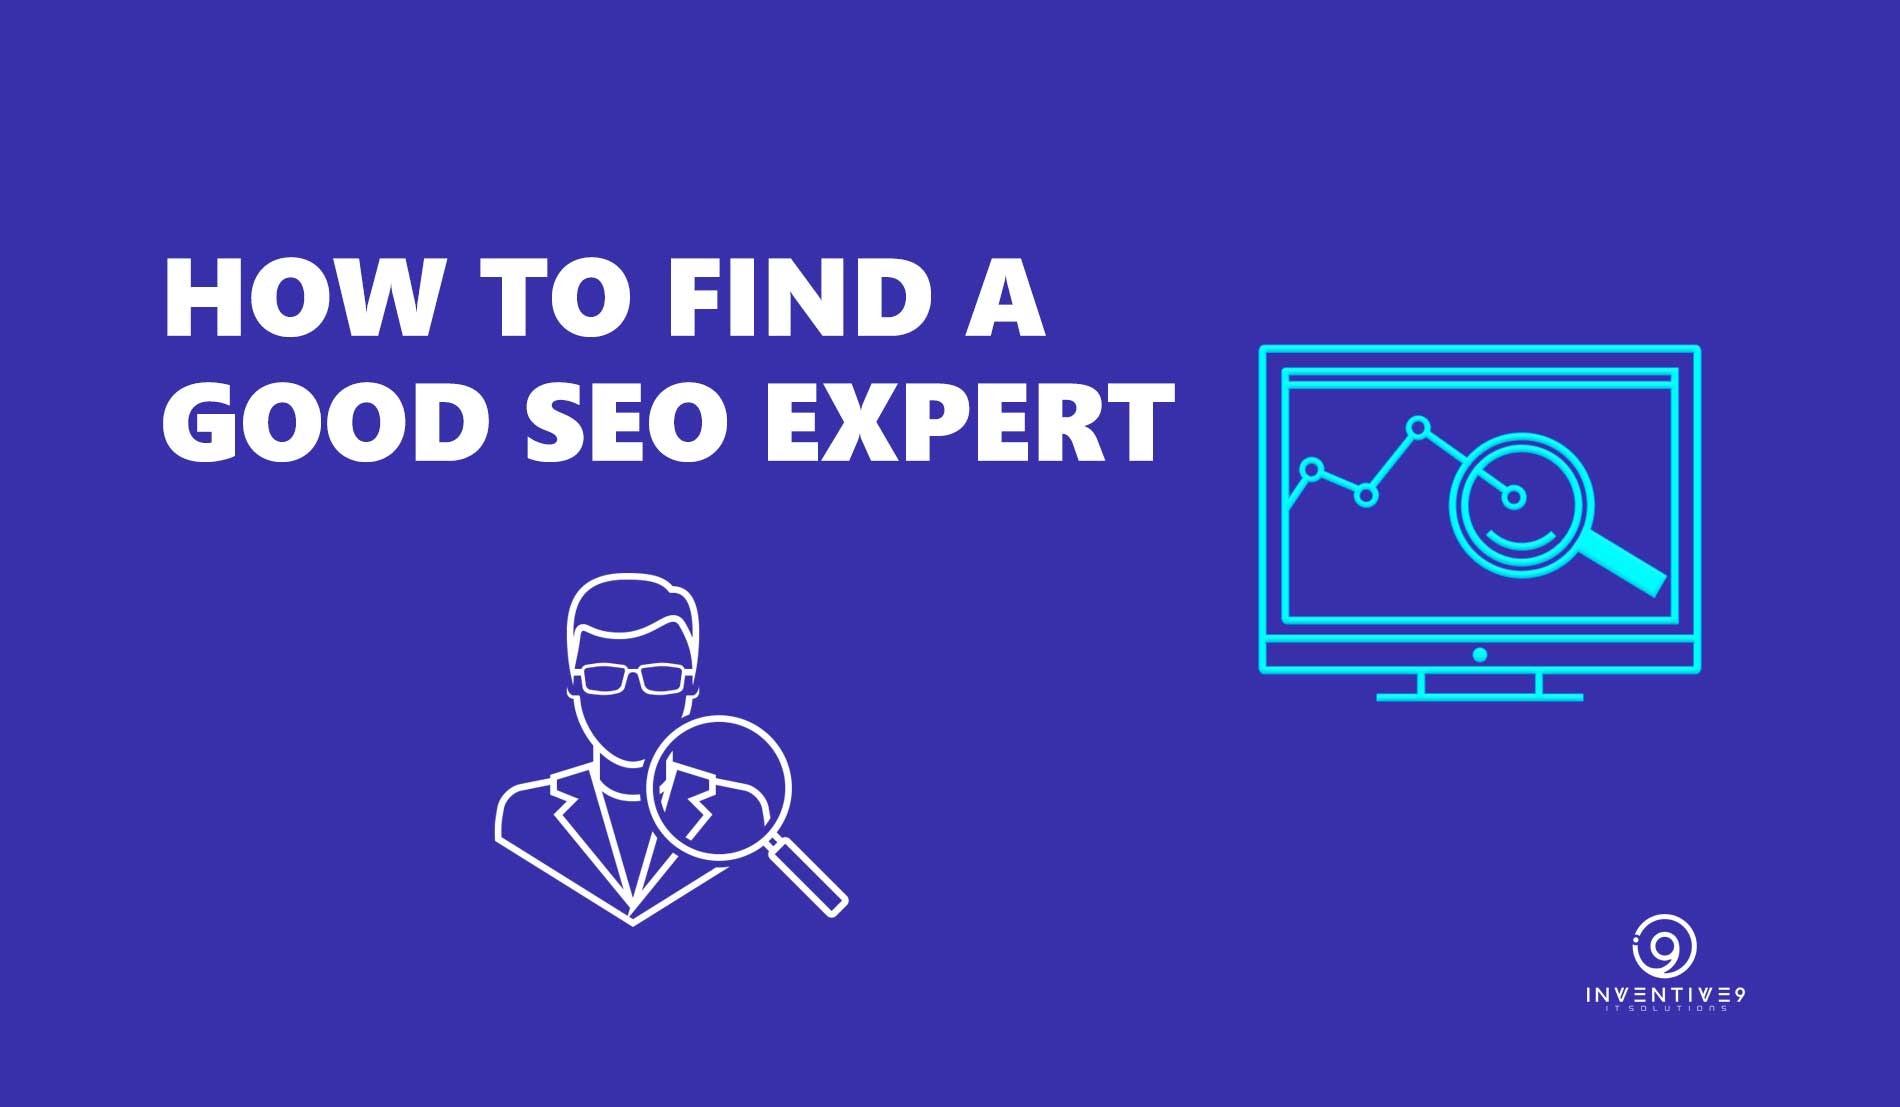 9 SEO Experts To Follow In 2018 - Inc.com